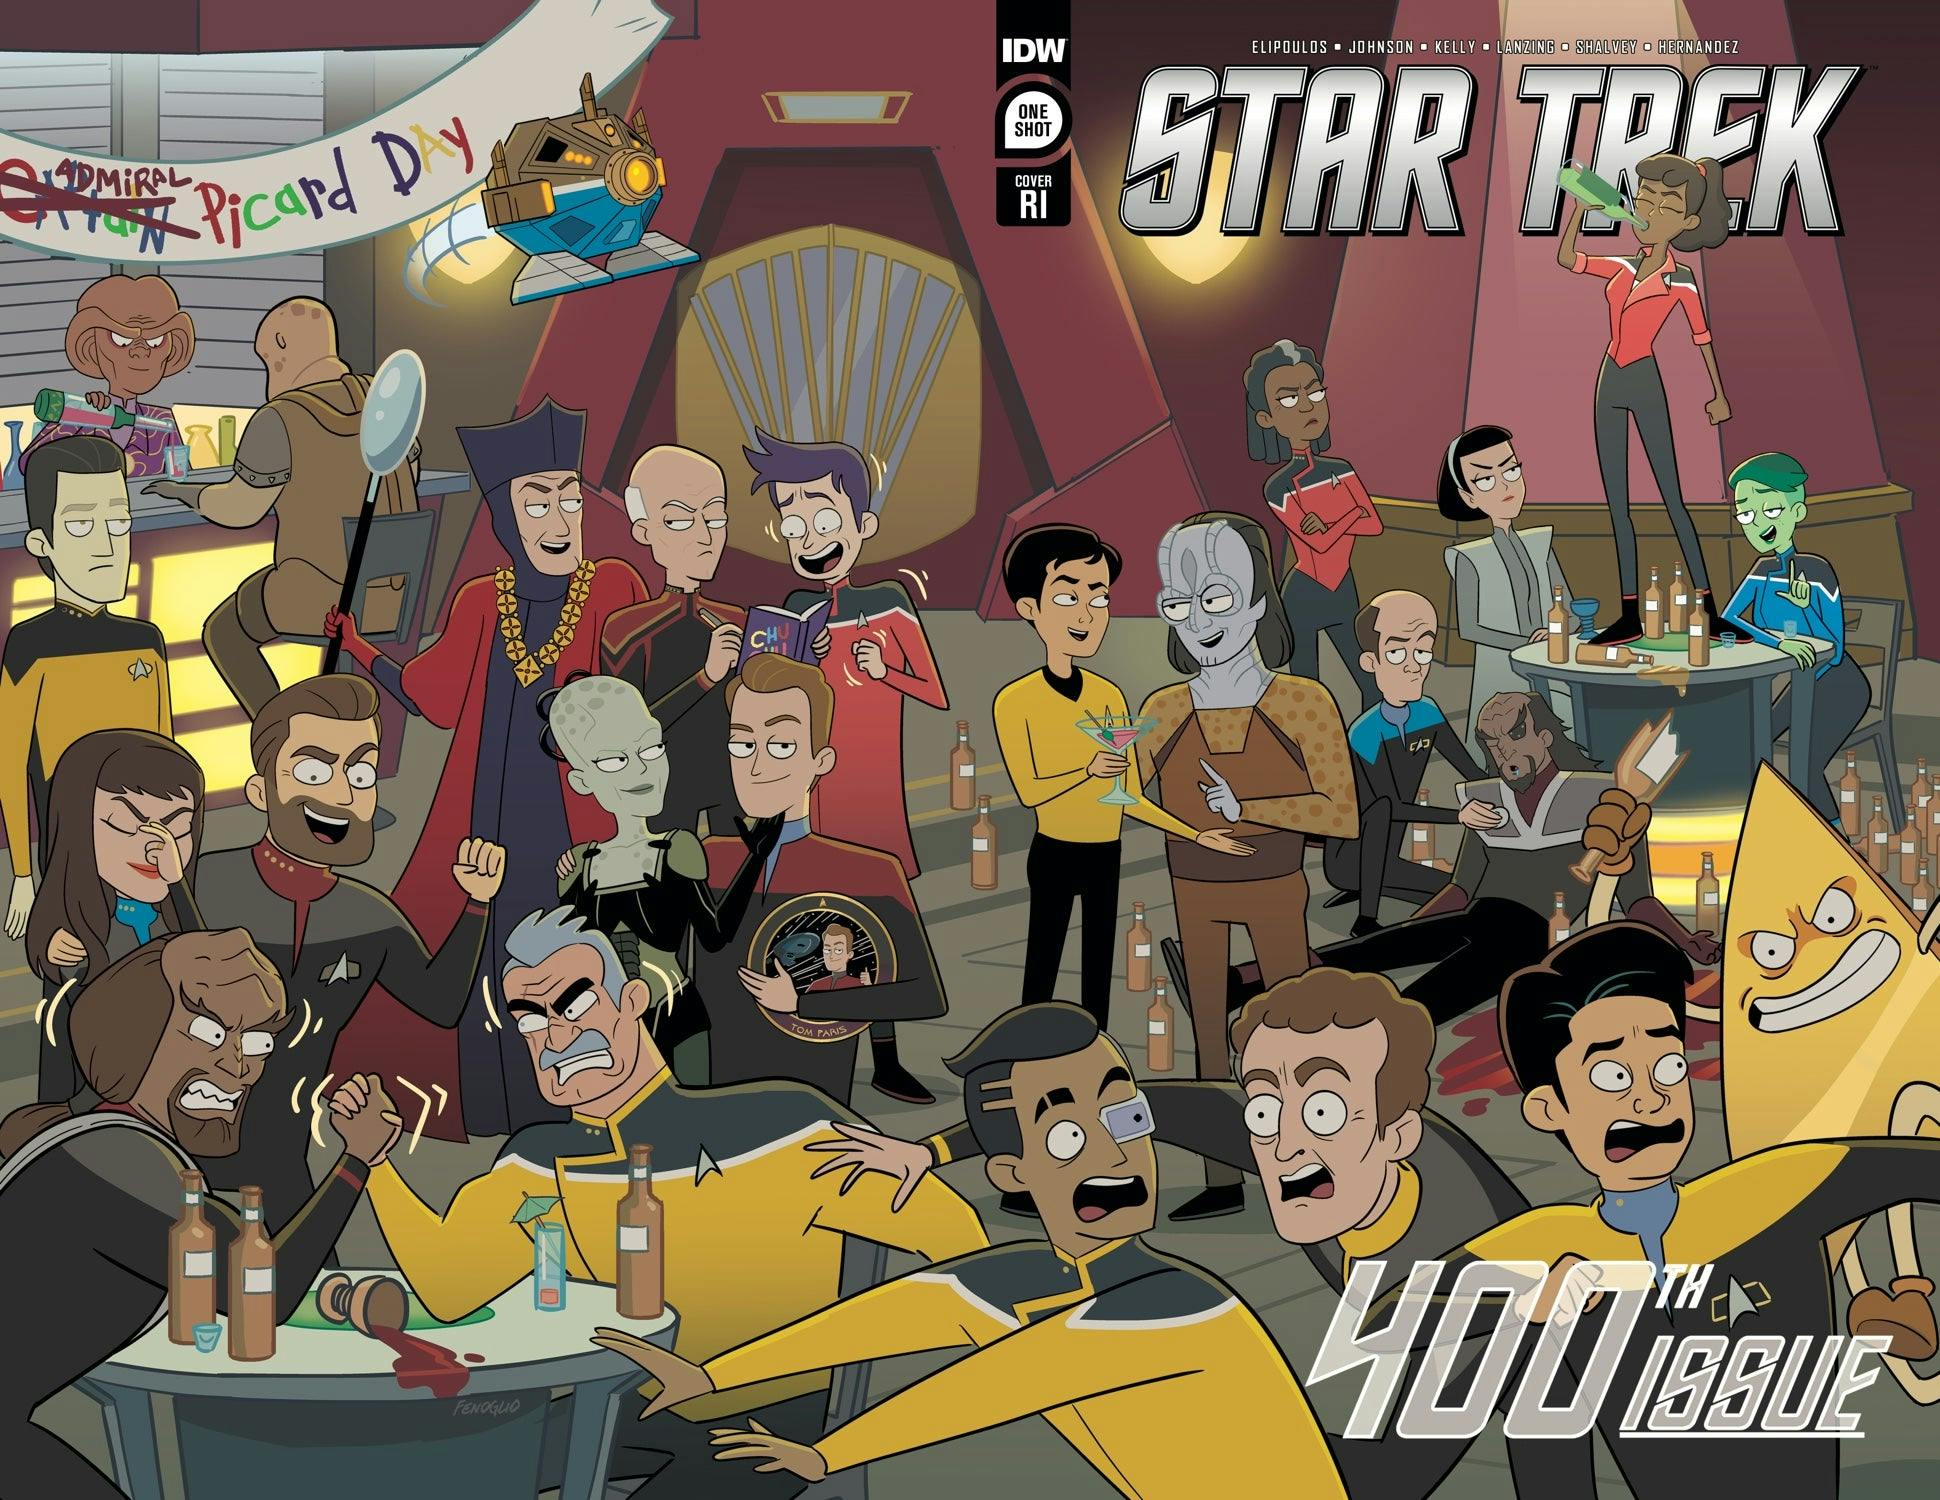 Star Trek #400 cover featuring a variety of characters drawn in the style of Star Trek: Lower Decks.